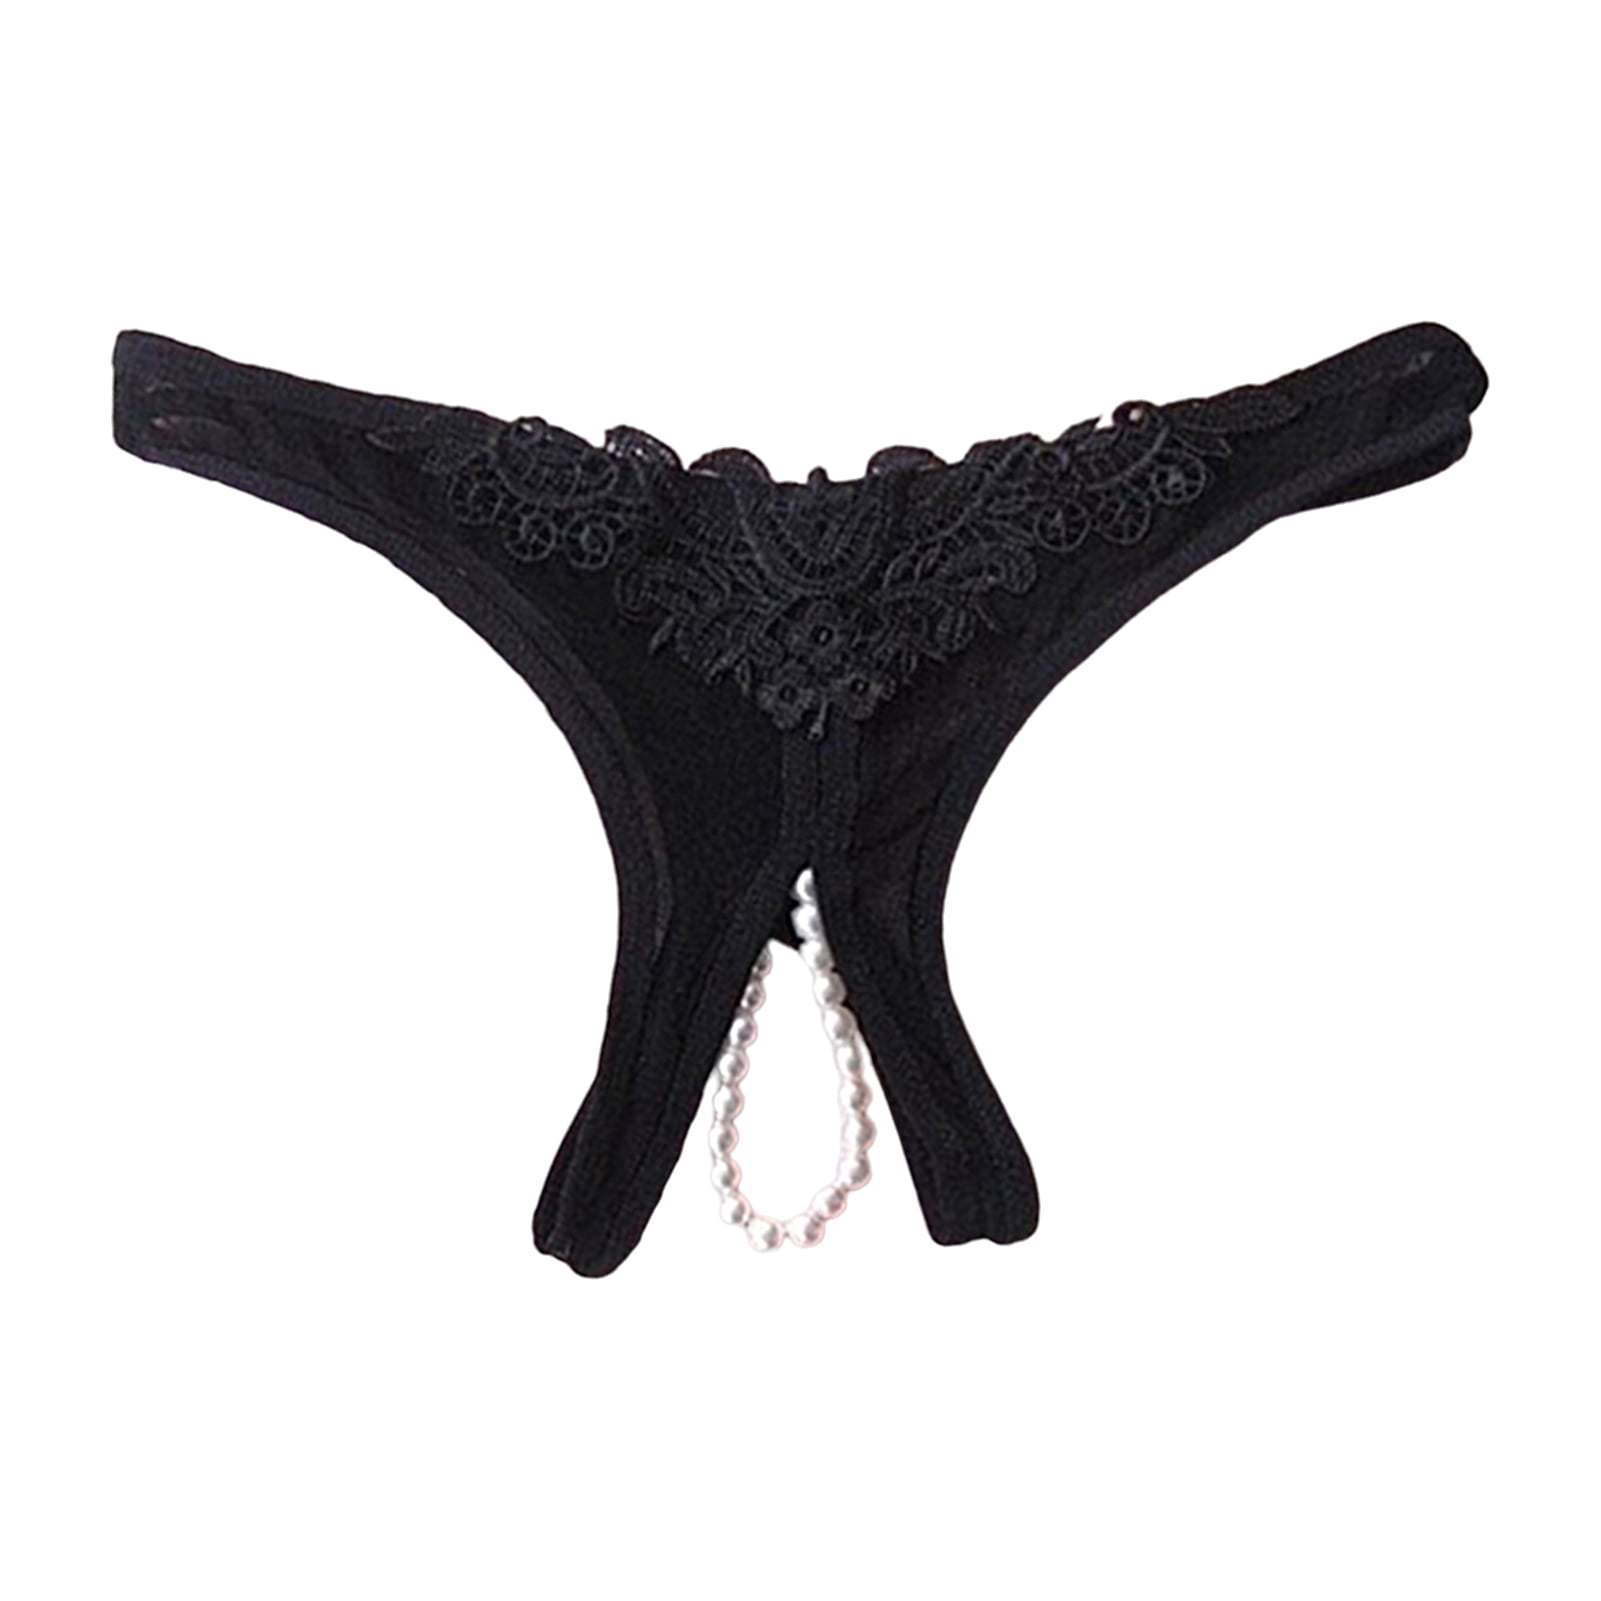 G-string Panties Low Waist Open Crotch See-through Hollow Hip G-String  Panties Women Accessory 